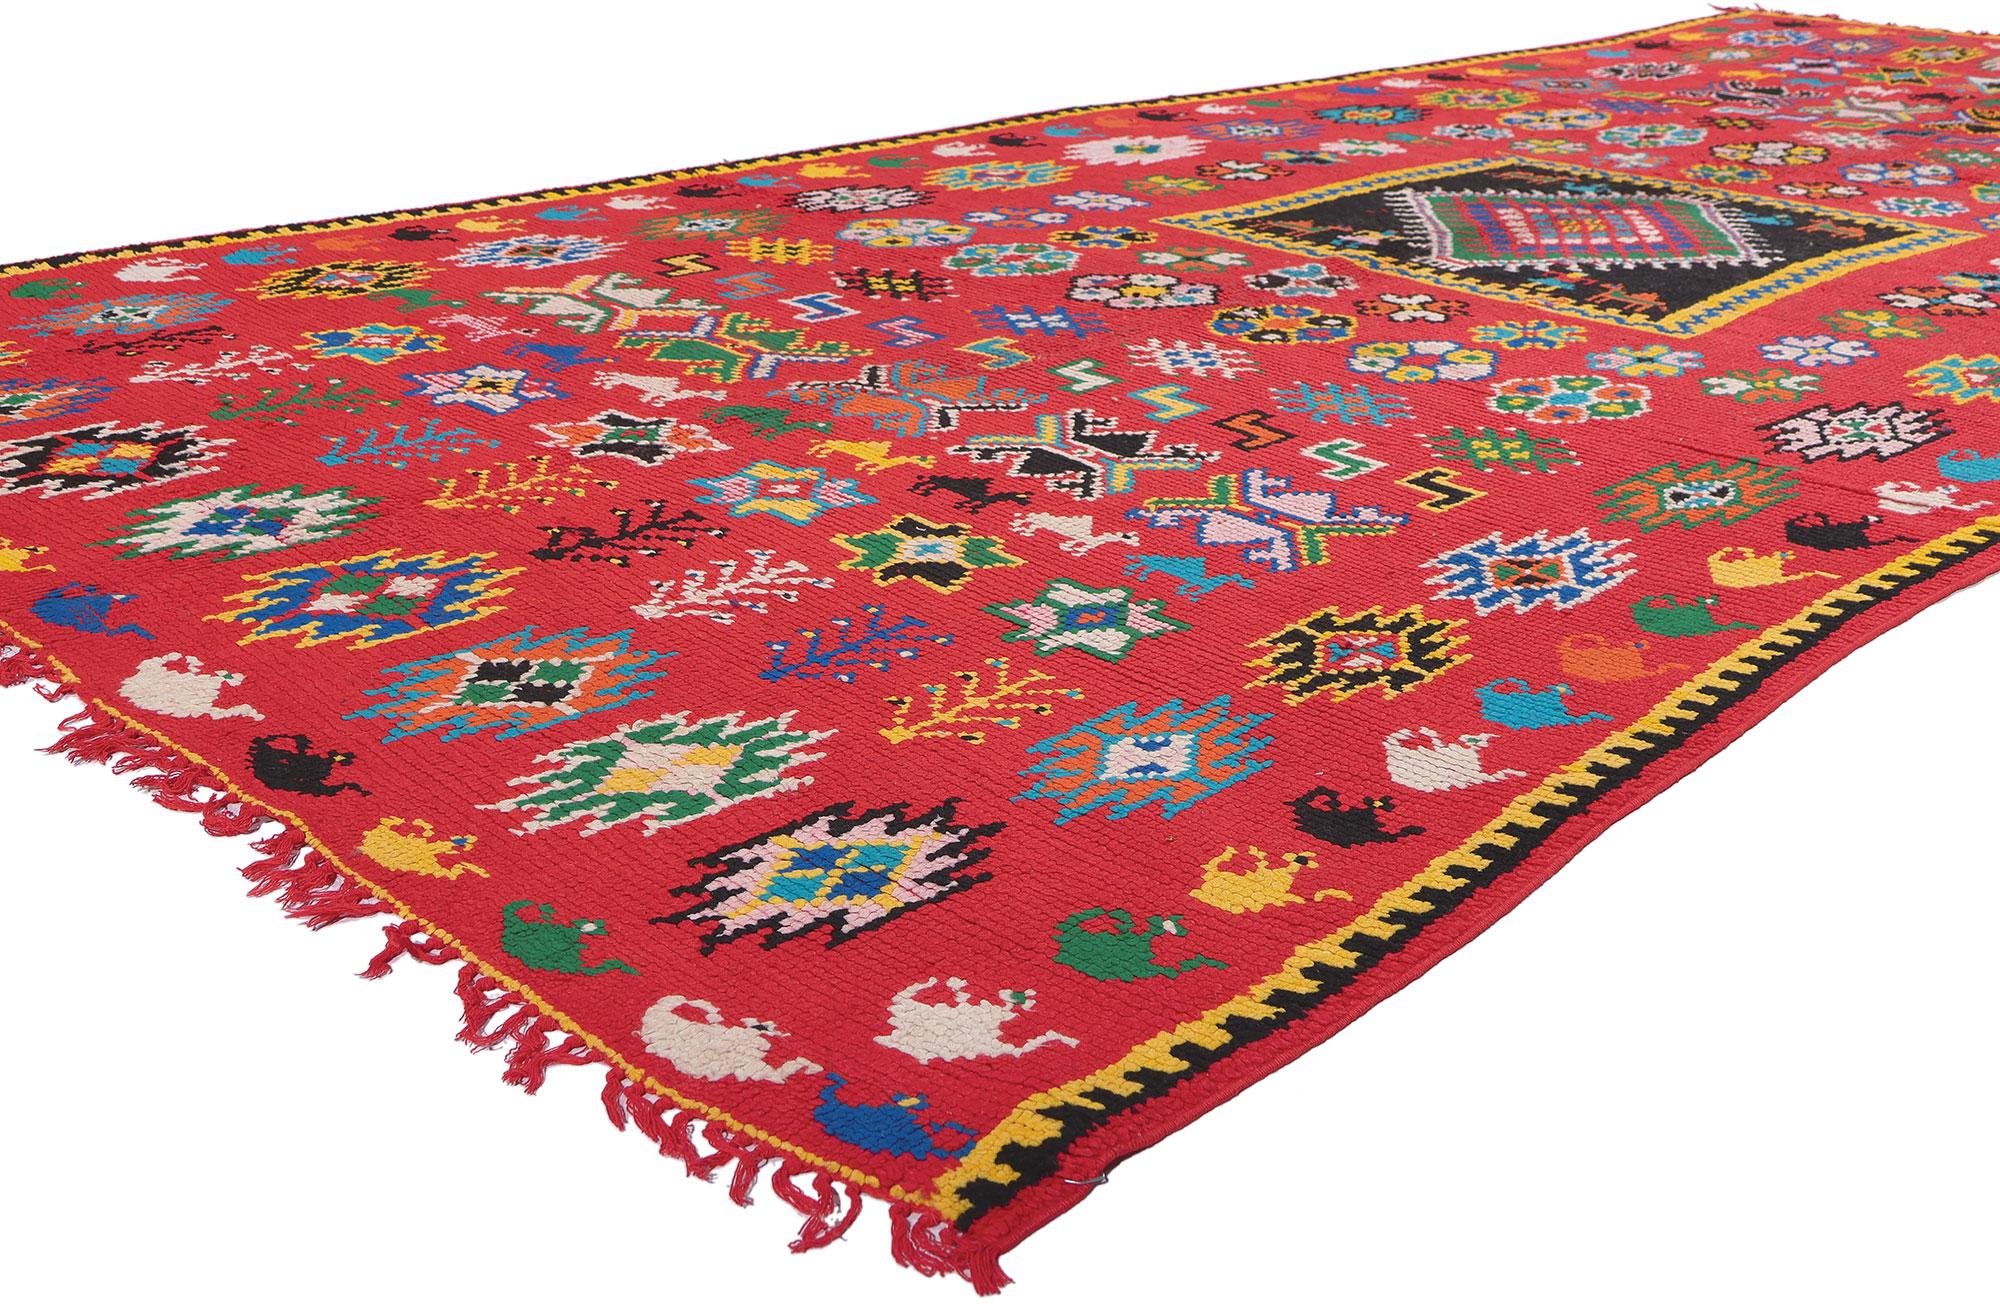 20217 Vintage Red Taznakht Moroccan Rug, 05'08 X 12'04. Embark on a captivating journey into the rich legacy of the Taznakht Tribe, where skilled hands in the High Atlas Mountains of southern Morocco meticulously crafted this hand-knotted wool